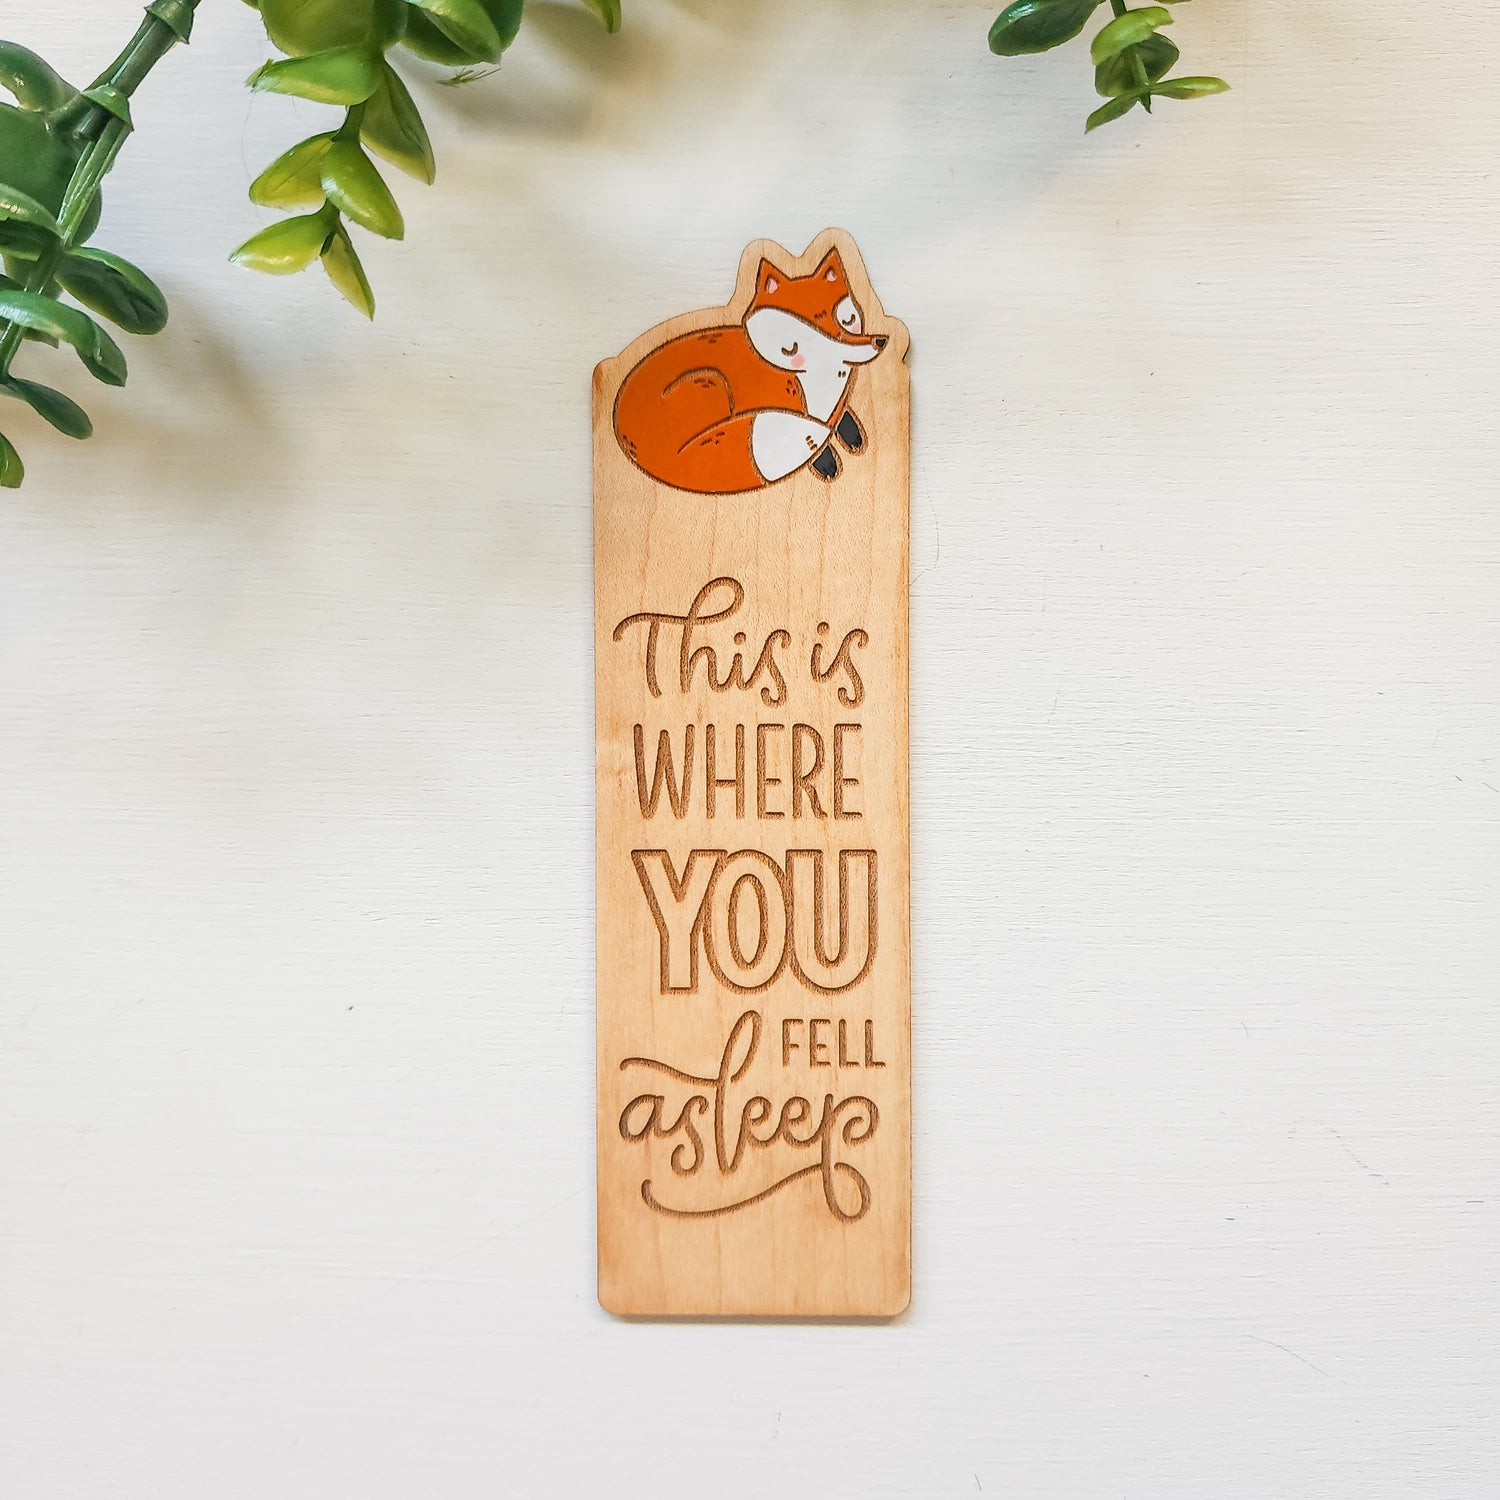 painted wooden fox bookmark that says this engraved with this is where you fell asleep